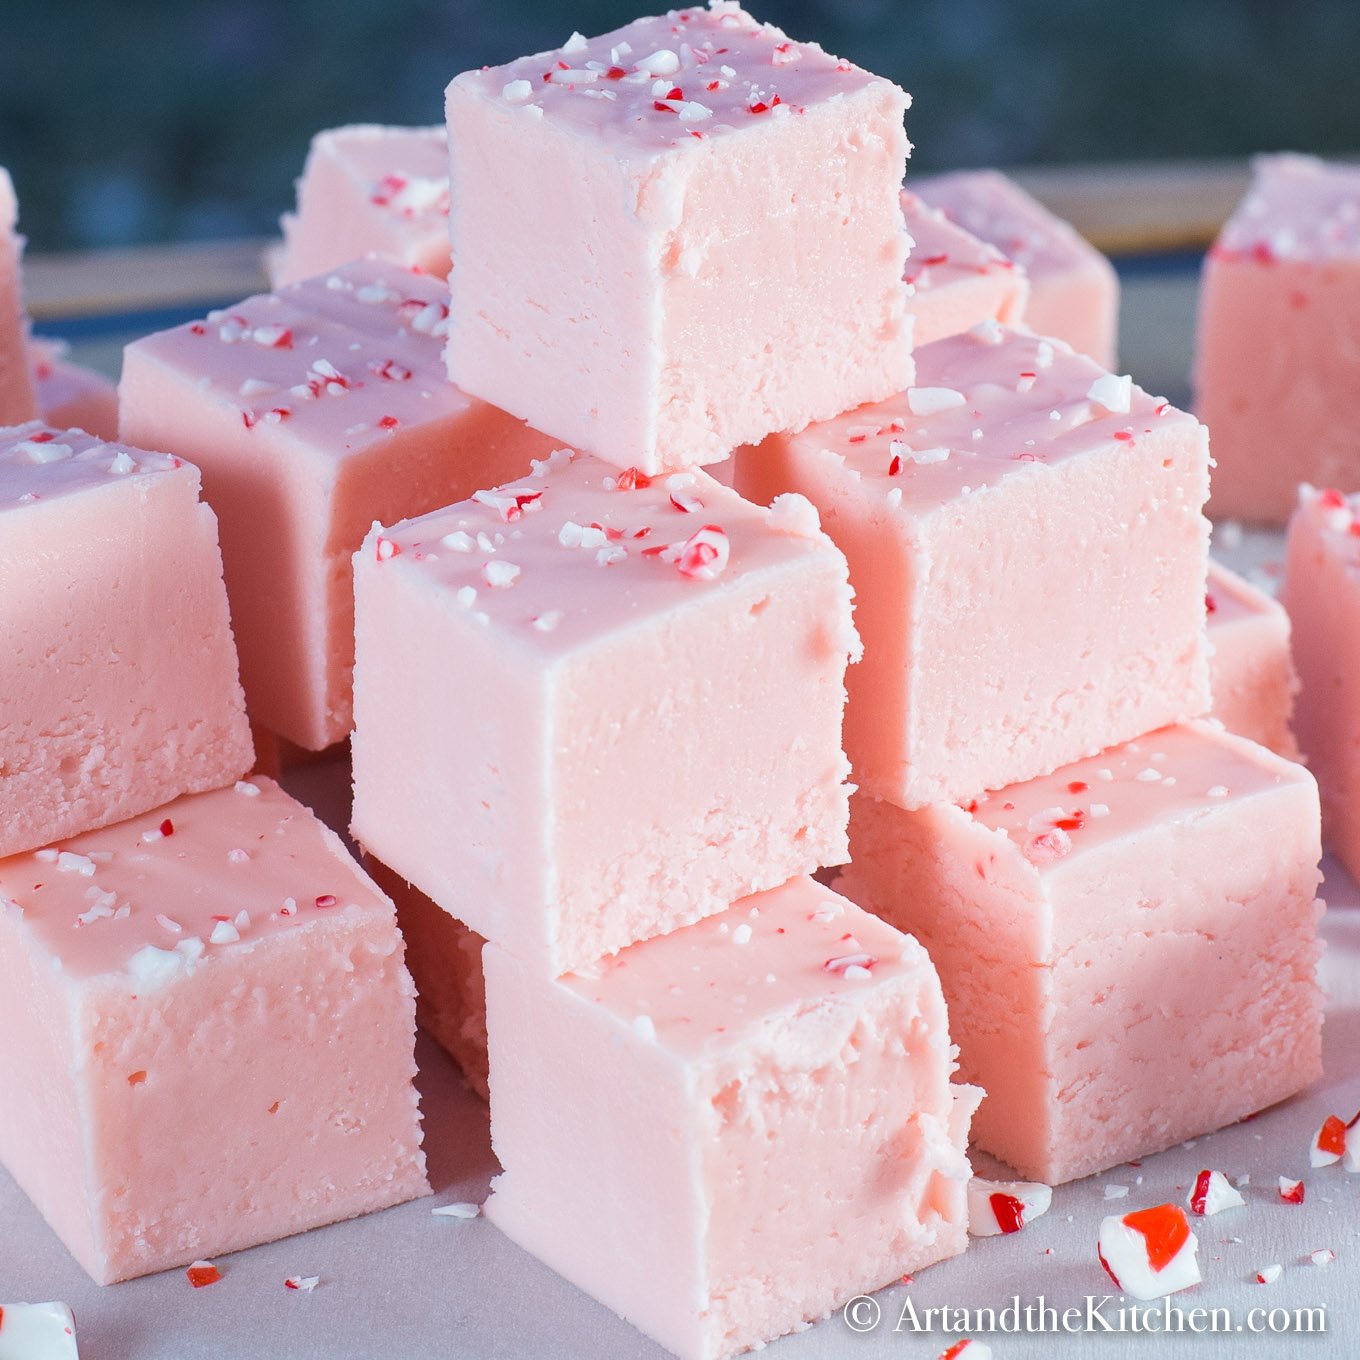 Stack of pink fudge made with ground up candy canes.